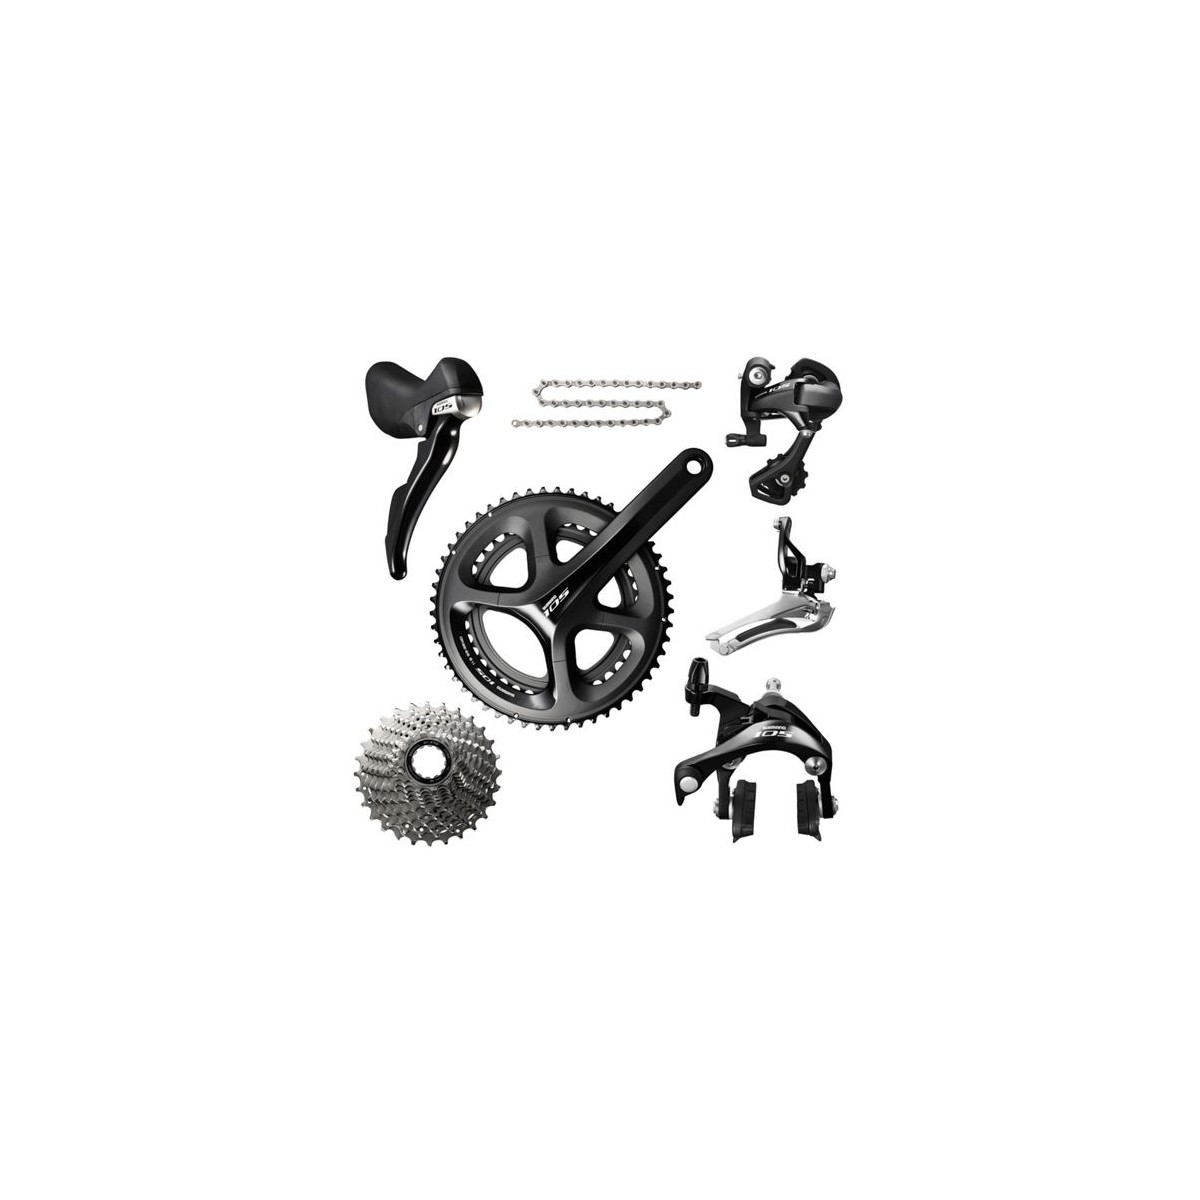 Shimano 105 5800 11 Speed Complete Groupset